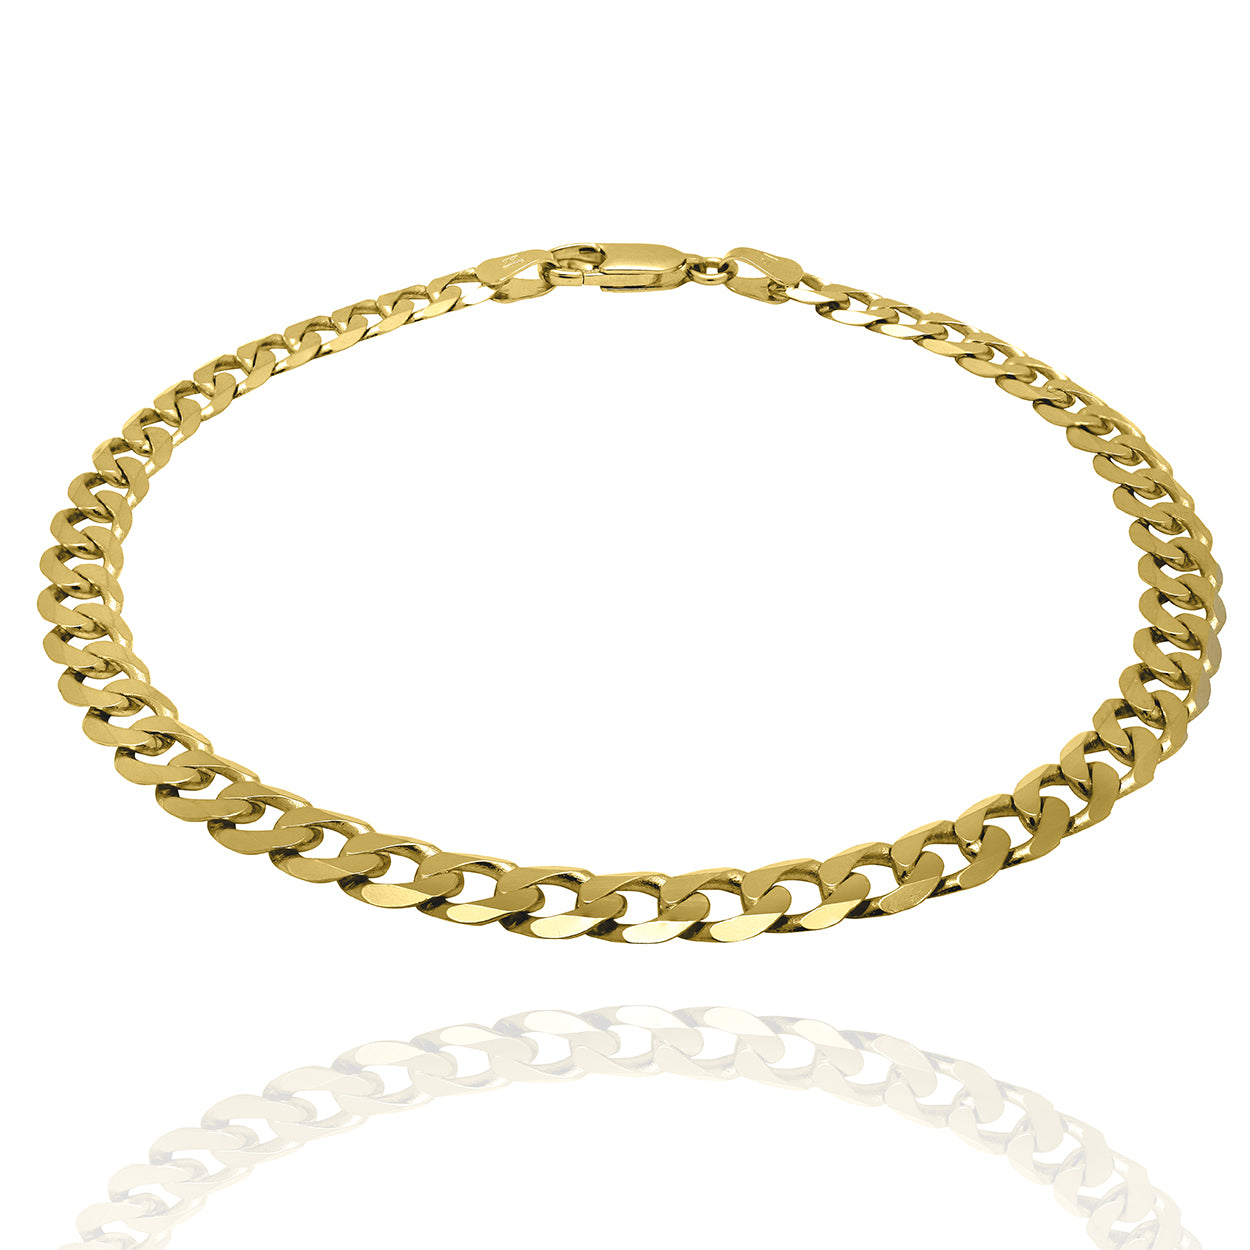 4.5mm wide Curb Style Bracelet Solid Gold Yellow